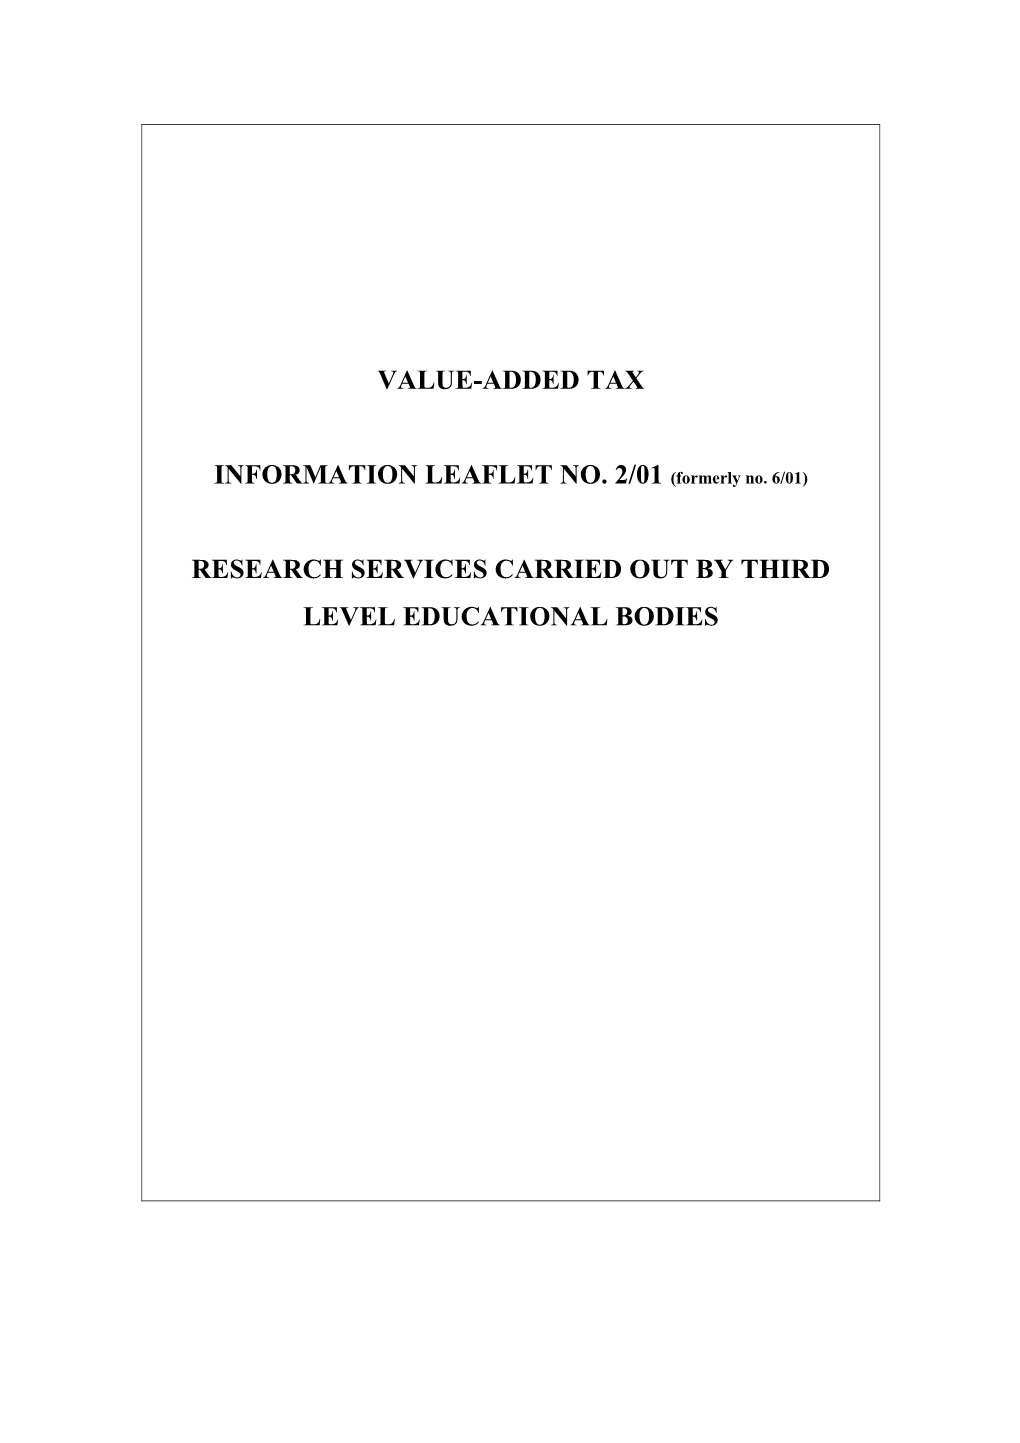 VAT Information Leaflet 2/01 - Research Services Carried out by Third Level Educational Bodies